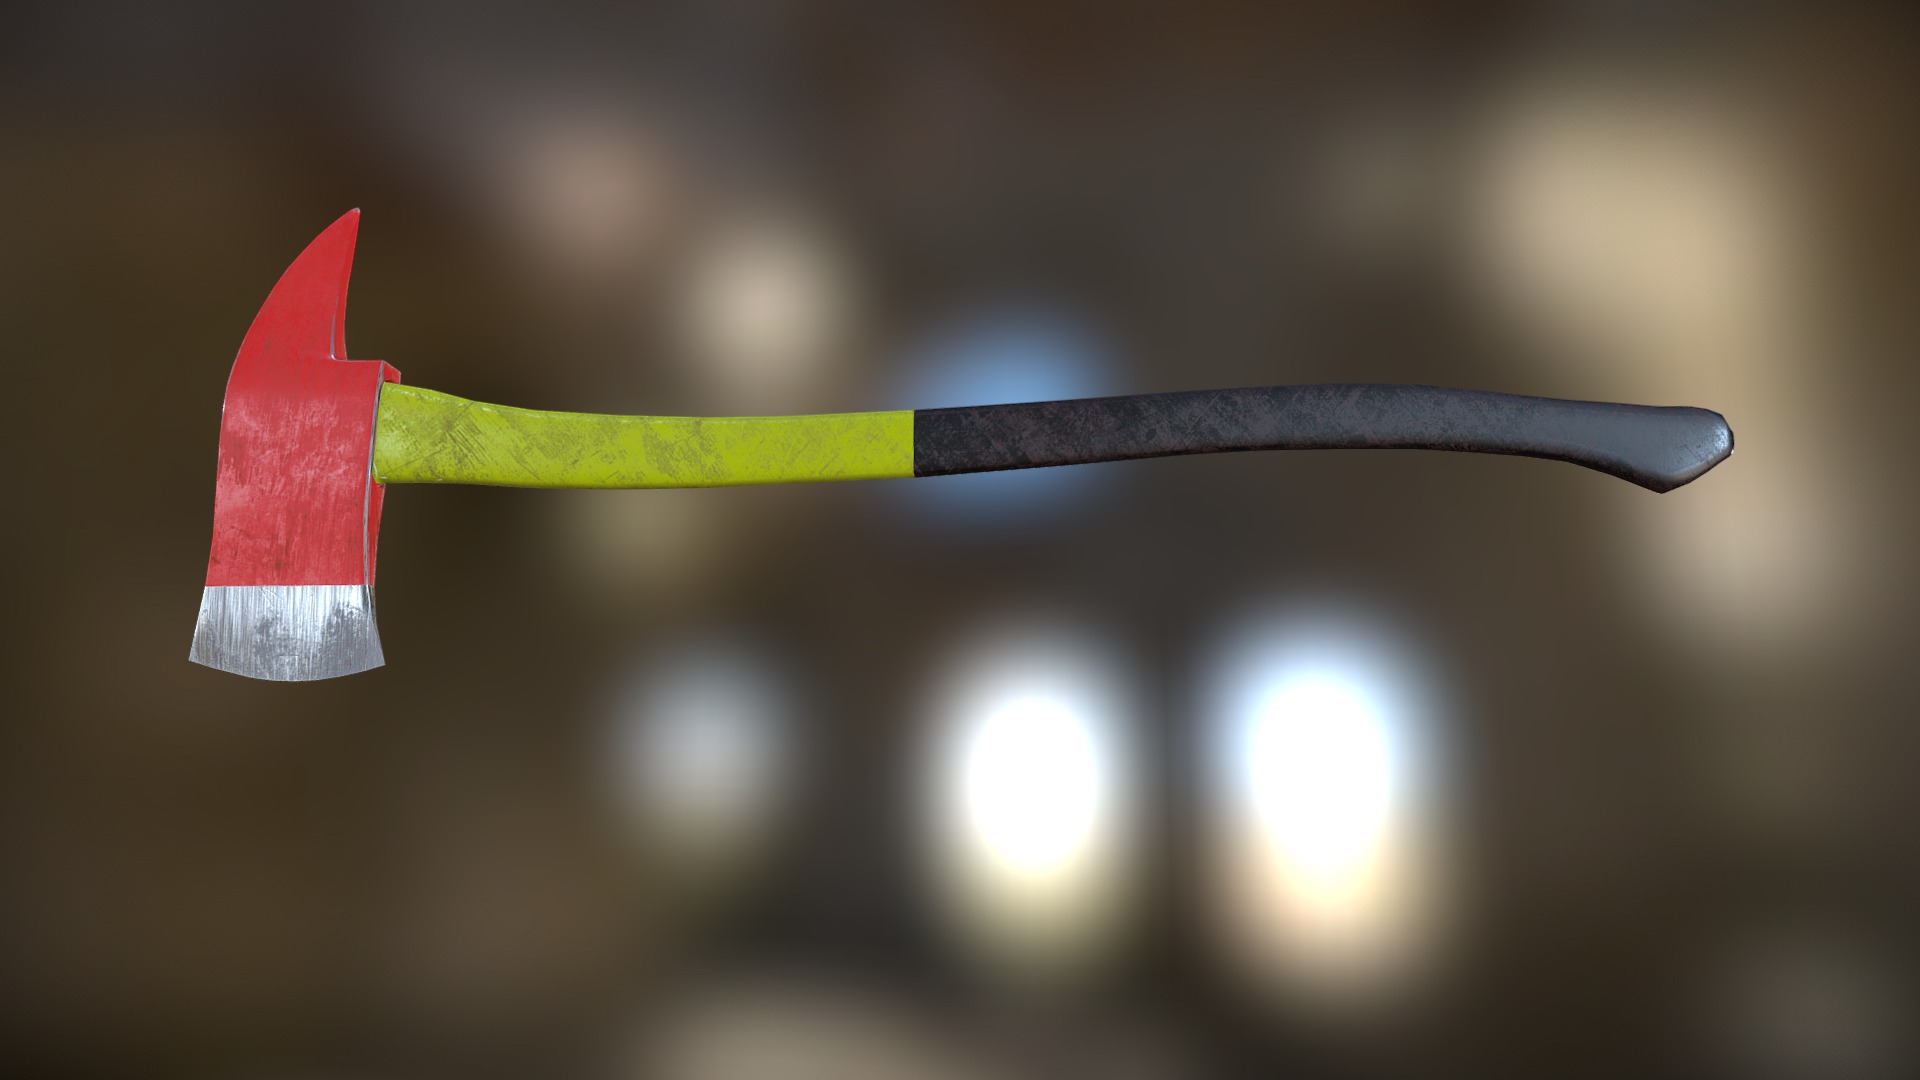 3D model Fireaxe - This is a 3D model of the Fireaxe. The 3D model is about a red and black pencil.